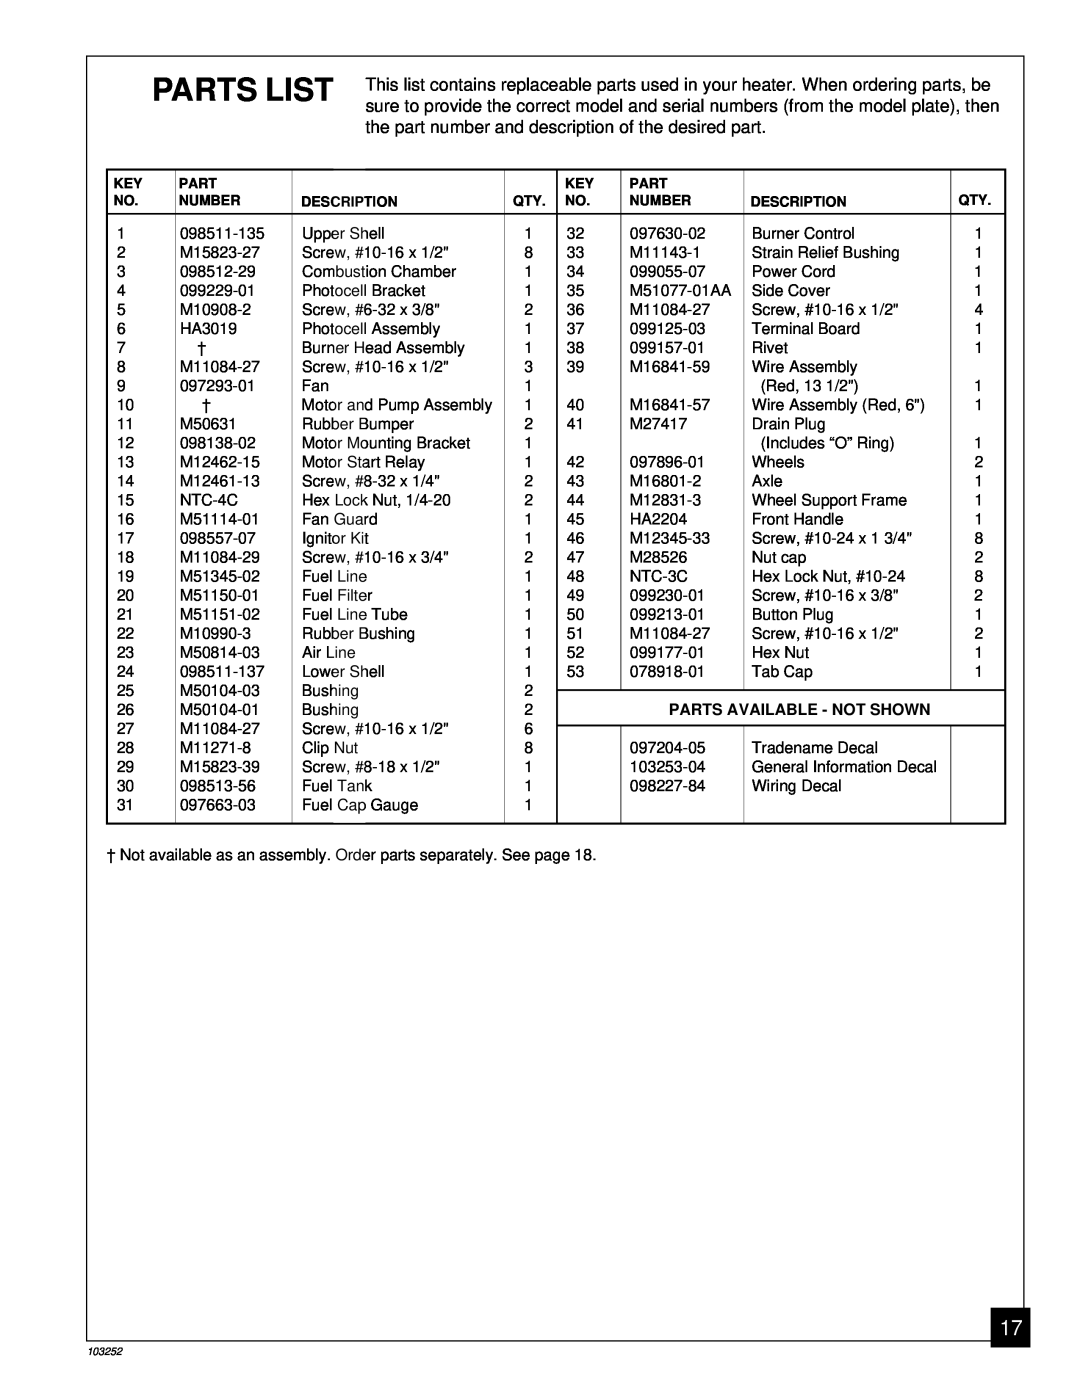 Desa RK150 owner manual Parts List, Parts Available - Not Shown 